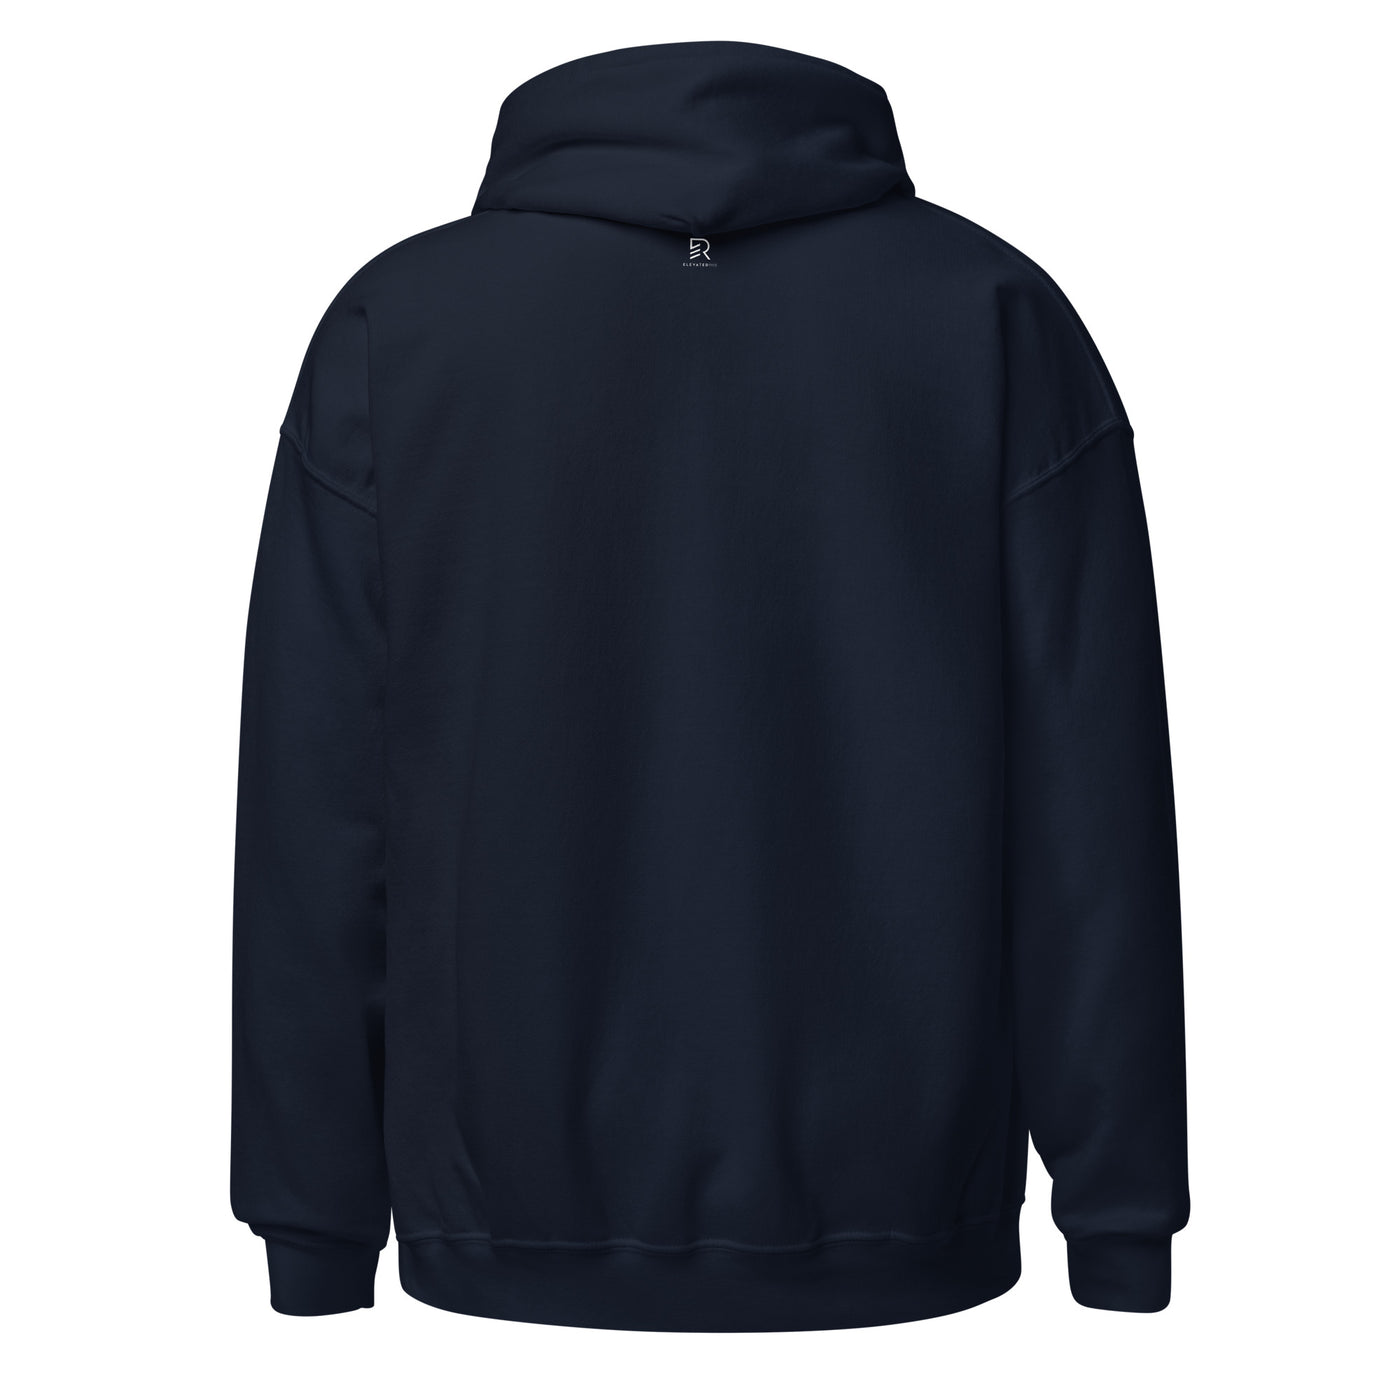 Women's Heavy Blend Embroidered Navy Hoodie - Focus is Possible